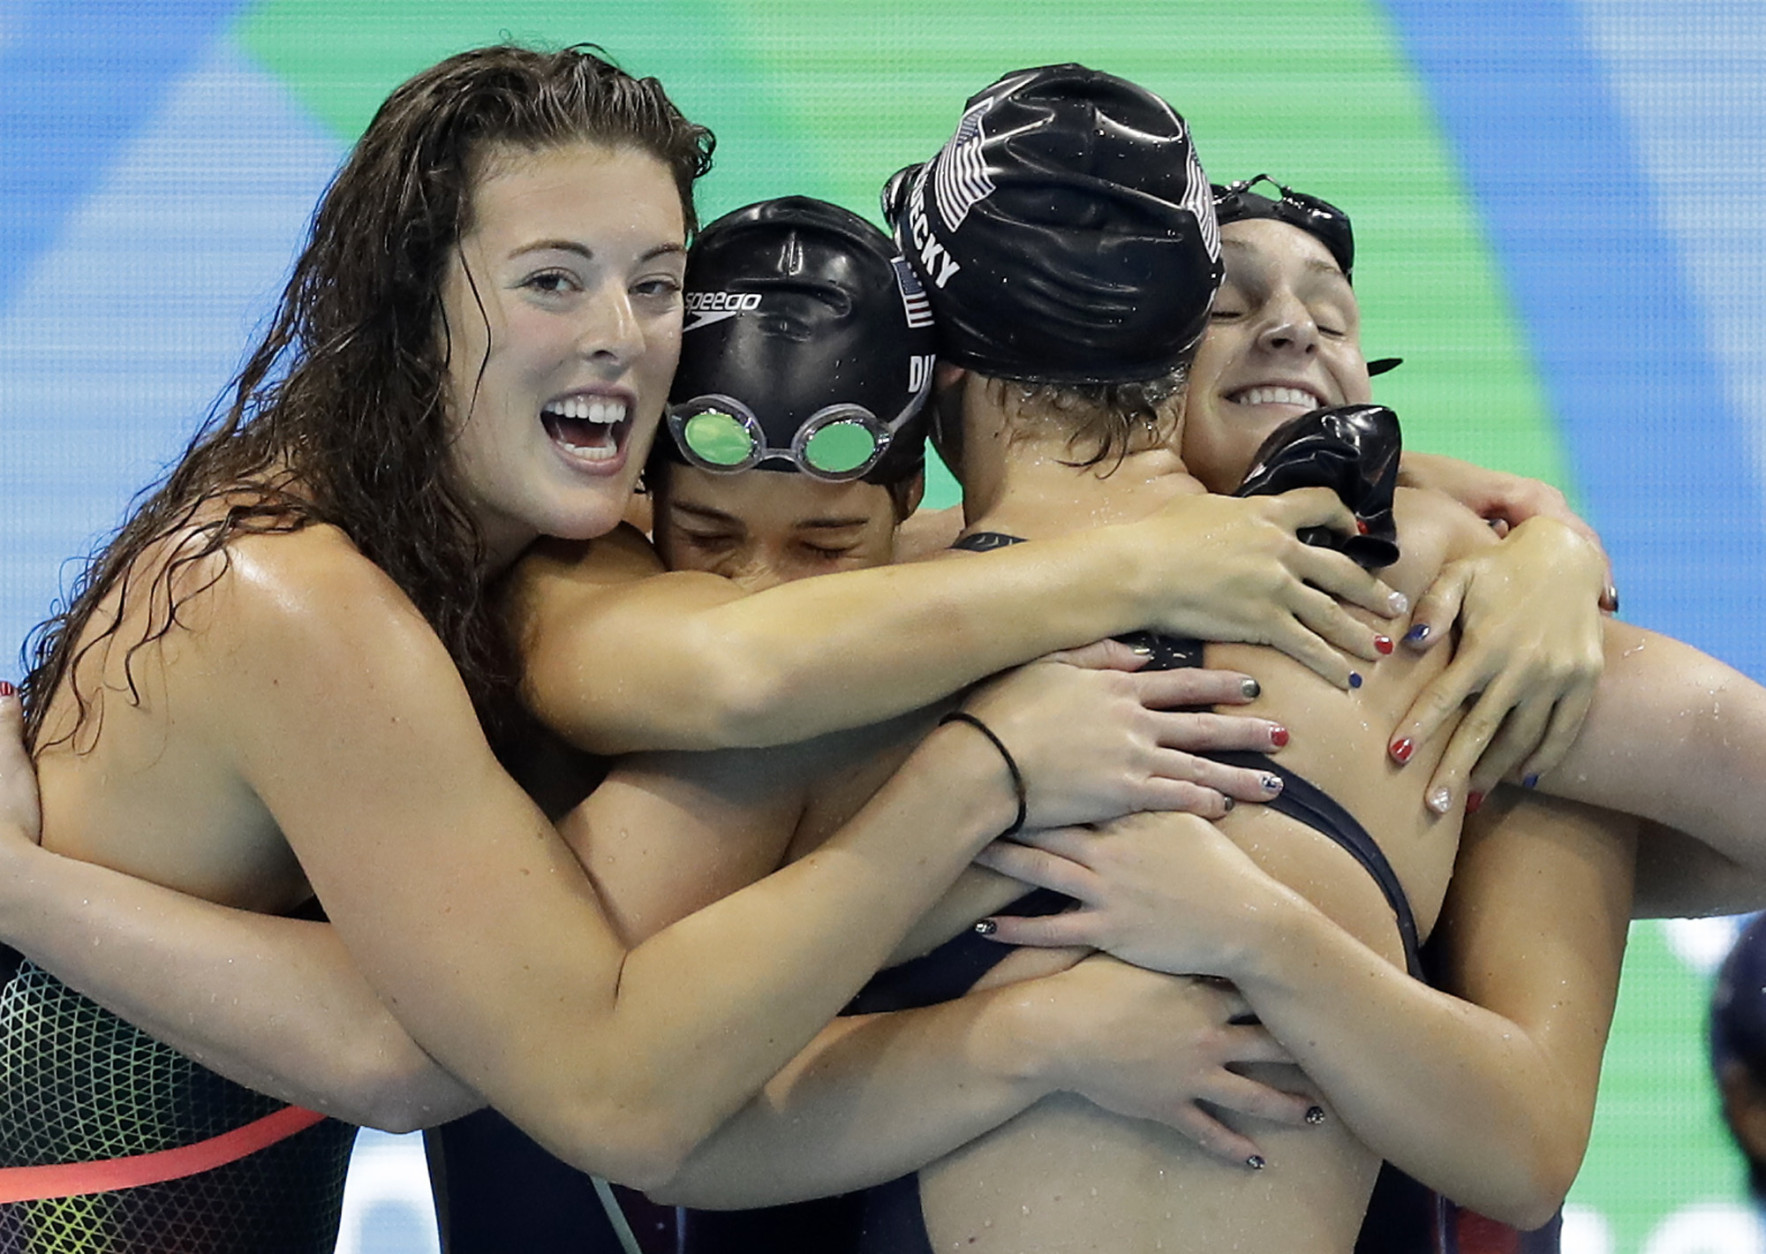 United States' Katie Ledecky, second from right, celebrates with her teammates Allison Schmitt, Maya DiRado and Leah Smith, from left, after coming in first in the women's 4 x 200-meter freestyle relay final during the swimming competitions at the 2016 Summer Olympics, Thursday, Aug. 11, 2016, in Rio de Janeiro, Brazil. (AP Photo/Michael Sohn)